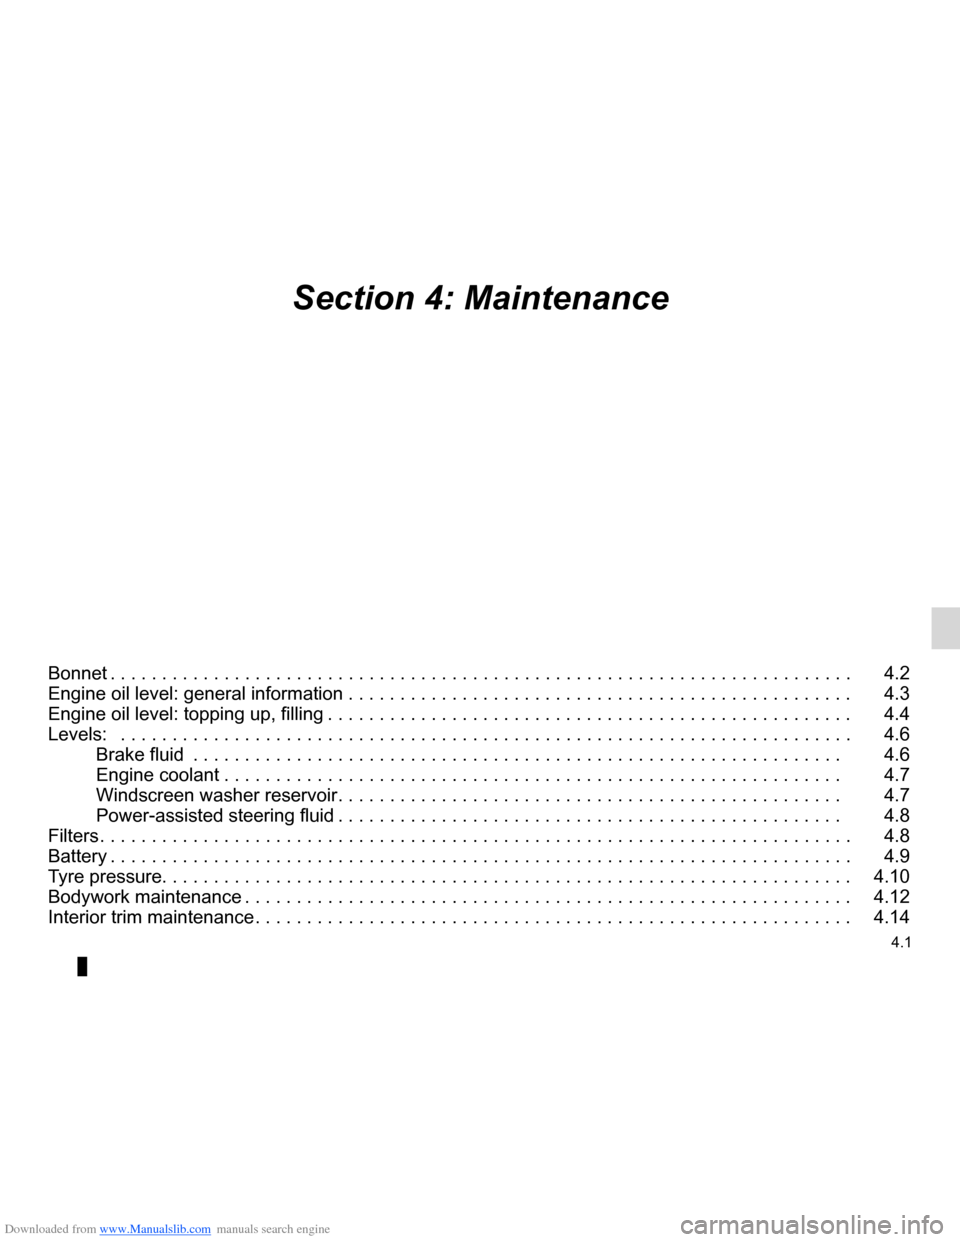 DACIA LODGY 2012 1.G Owners Manual Downloaded from www.Manualslib.com manuals search engine 4.1
ENG_UD28066_3
Sommaire 4 (X92 - Renault)
ENG_NU_975-3_X92_Dacia_4
Section 4: Maintenance
Bonnet . . . . . . . . . . . . . . . . . . . . . .